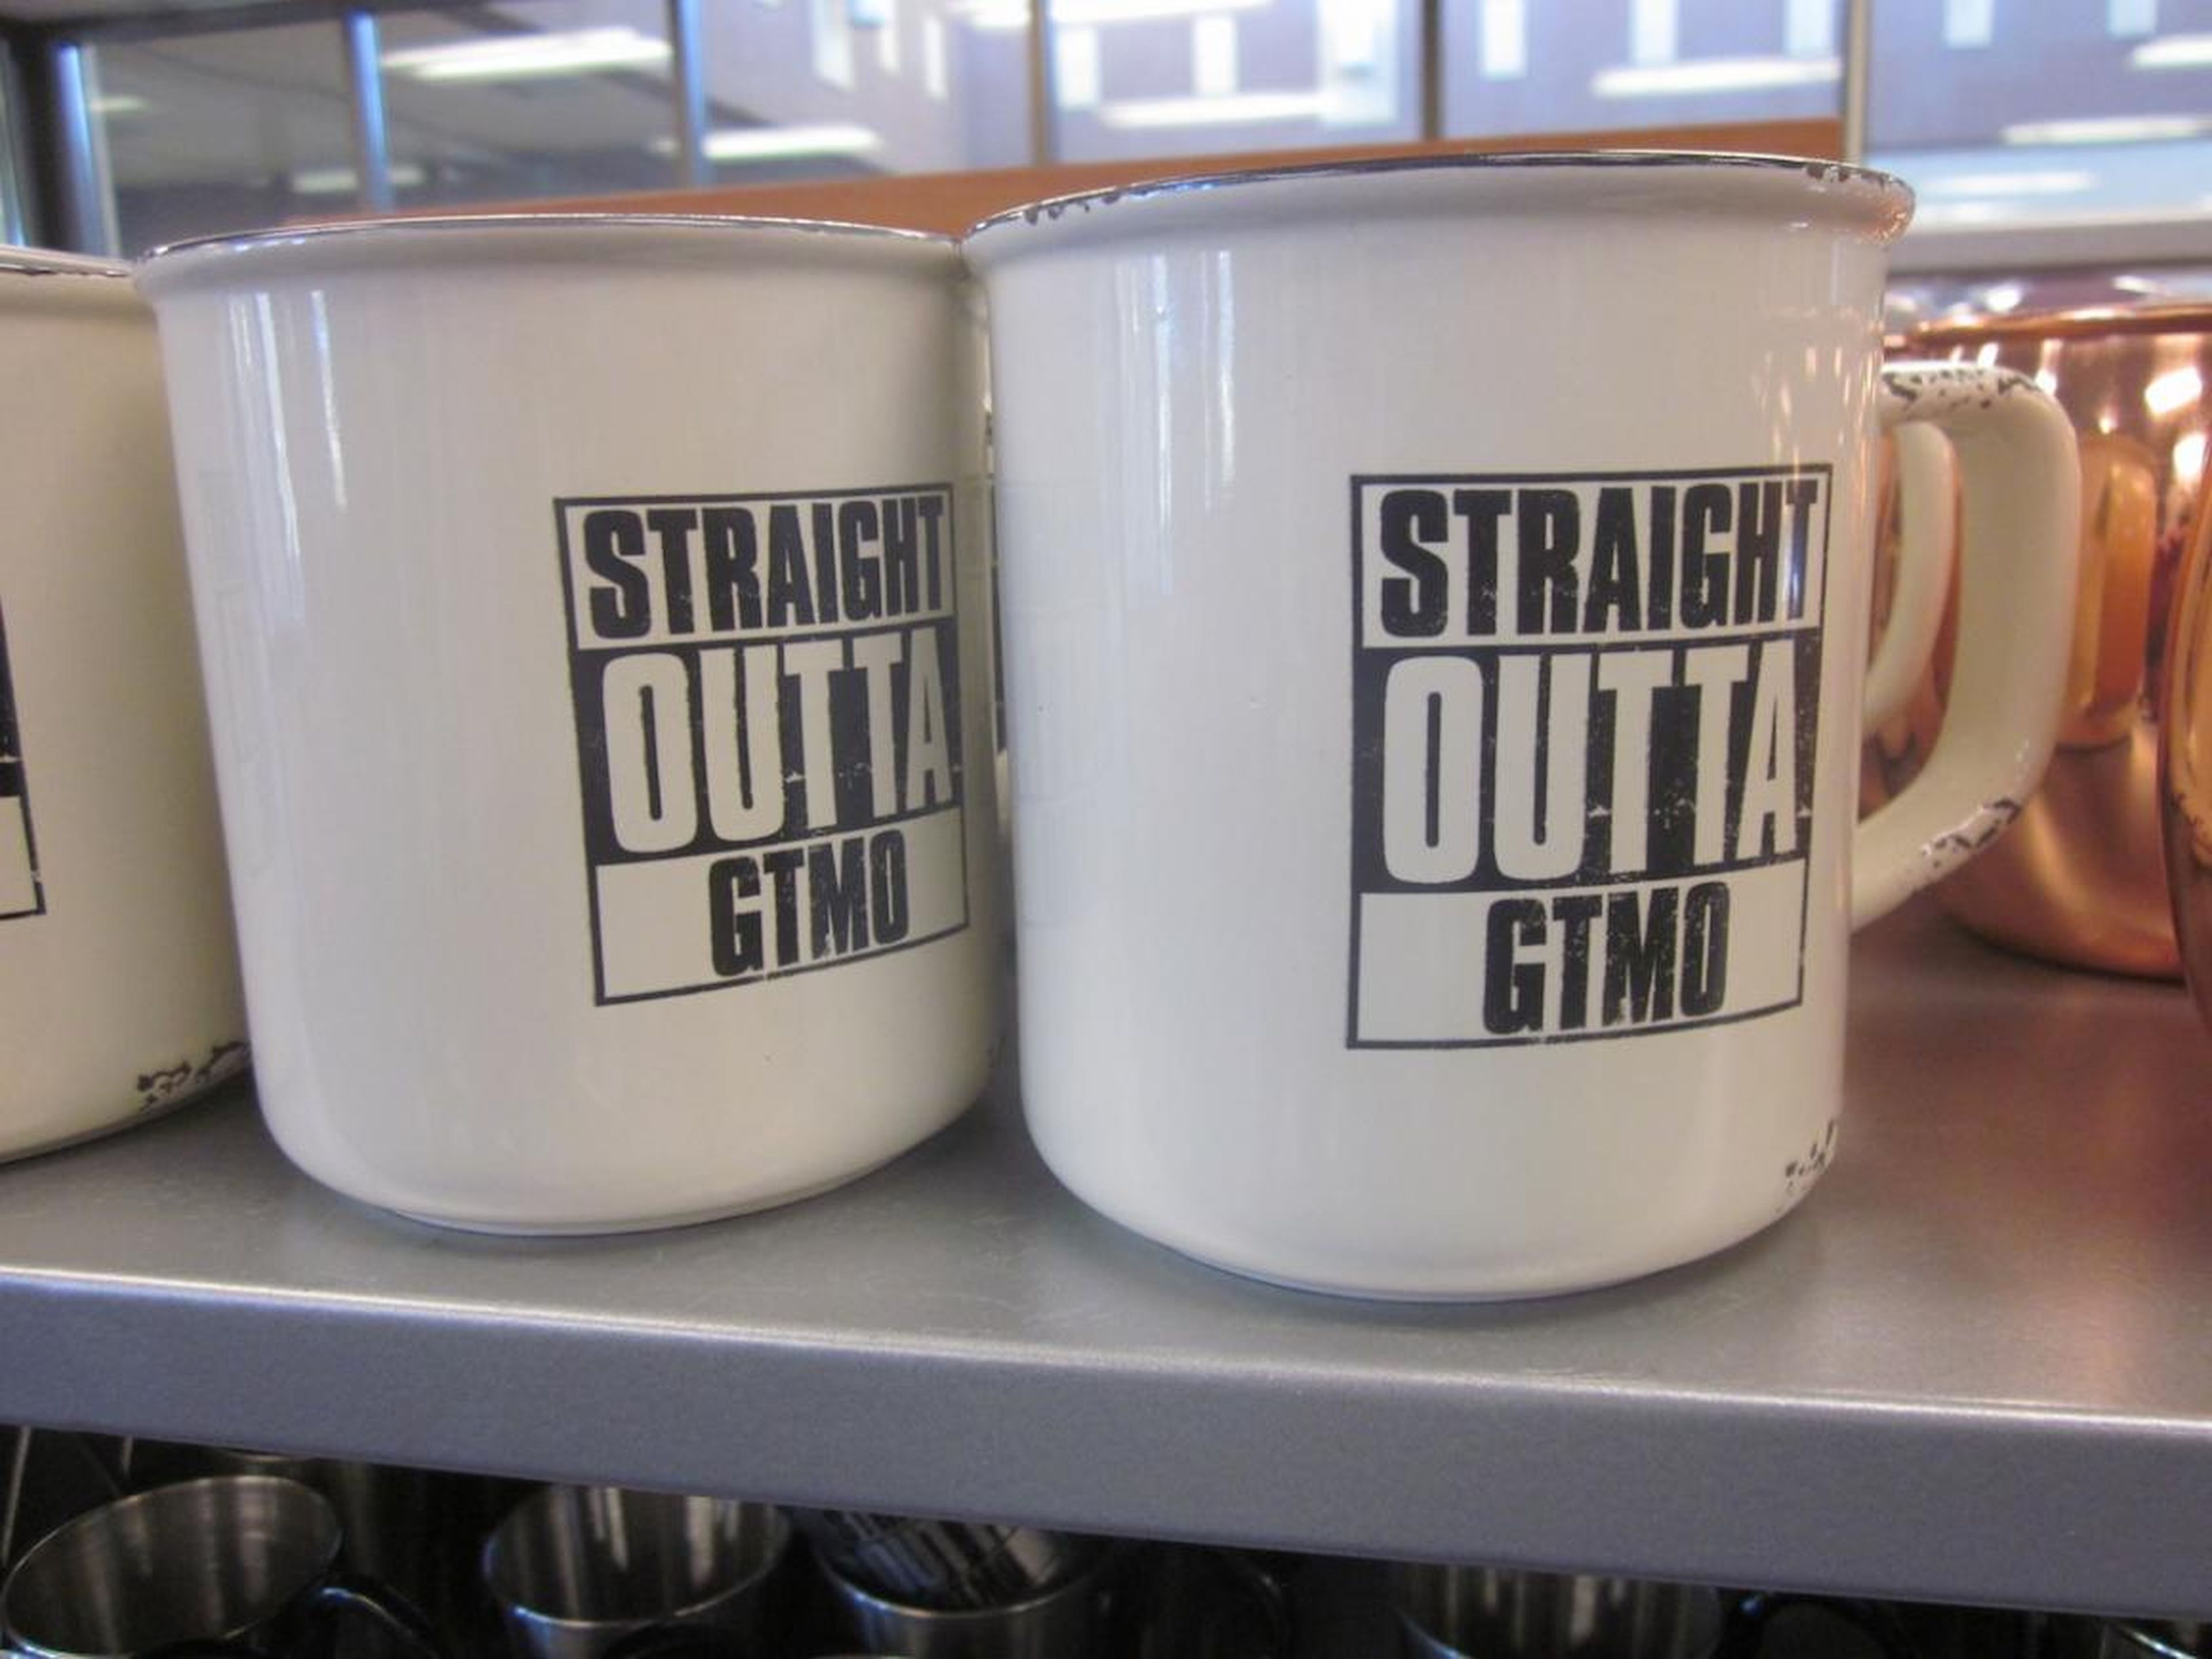 This mug also references the base as GTMO — the US military's code name for Guantanamo Bay — playing on the 1988 NWA album "Straight Outta Compton."